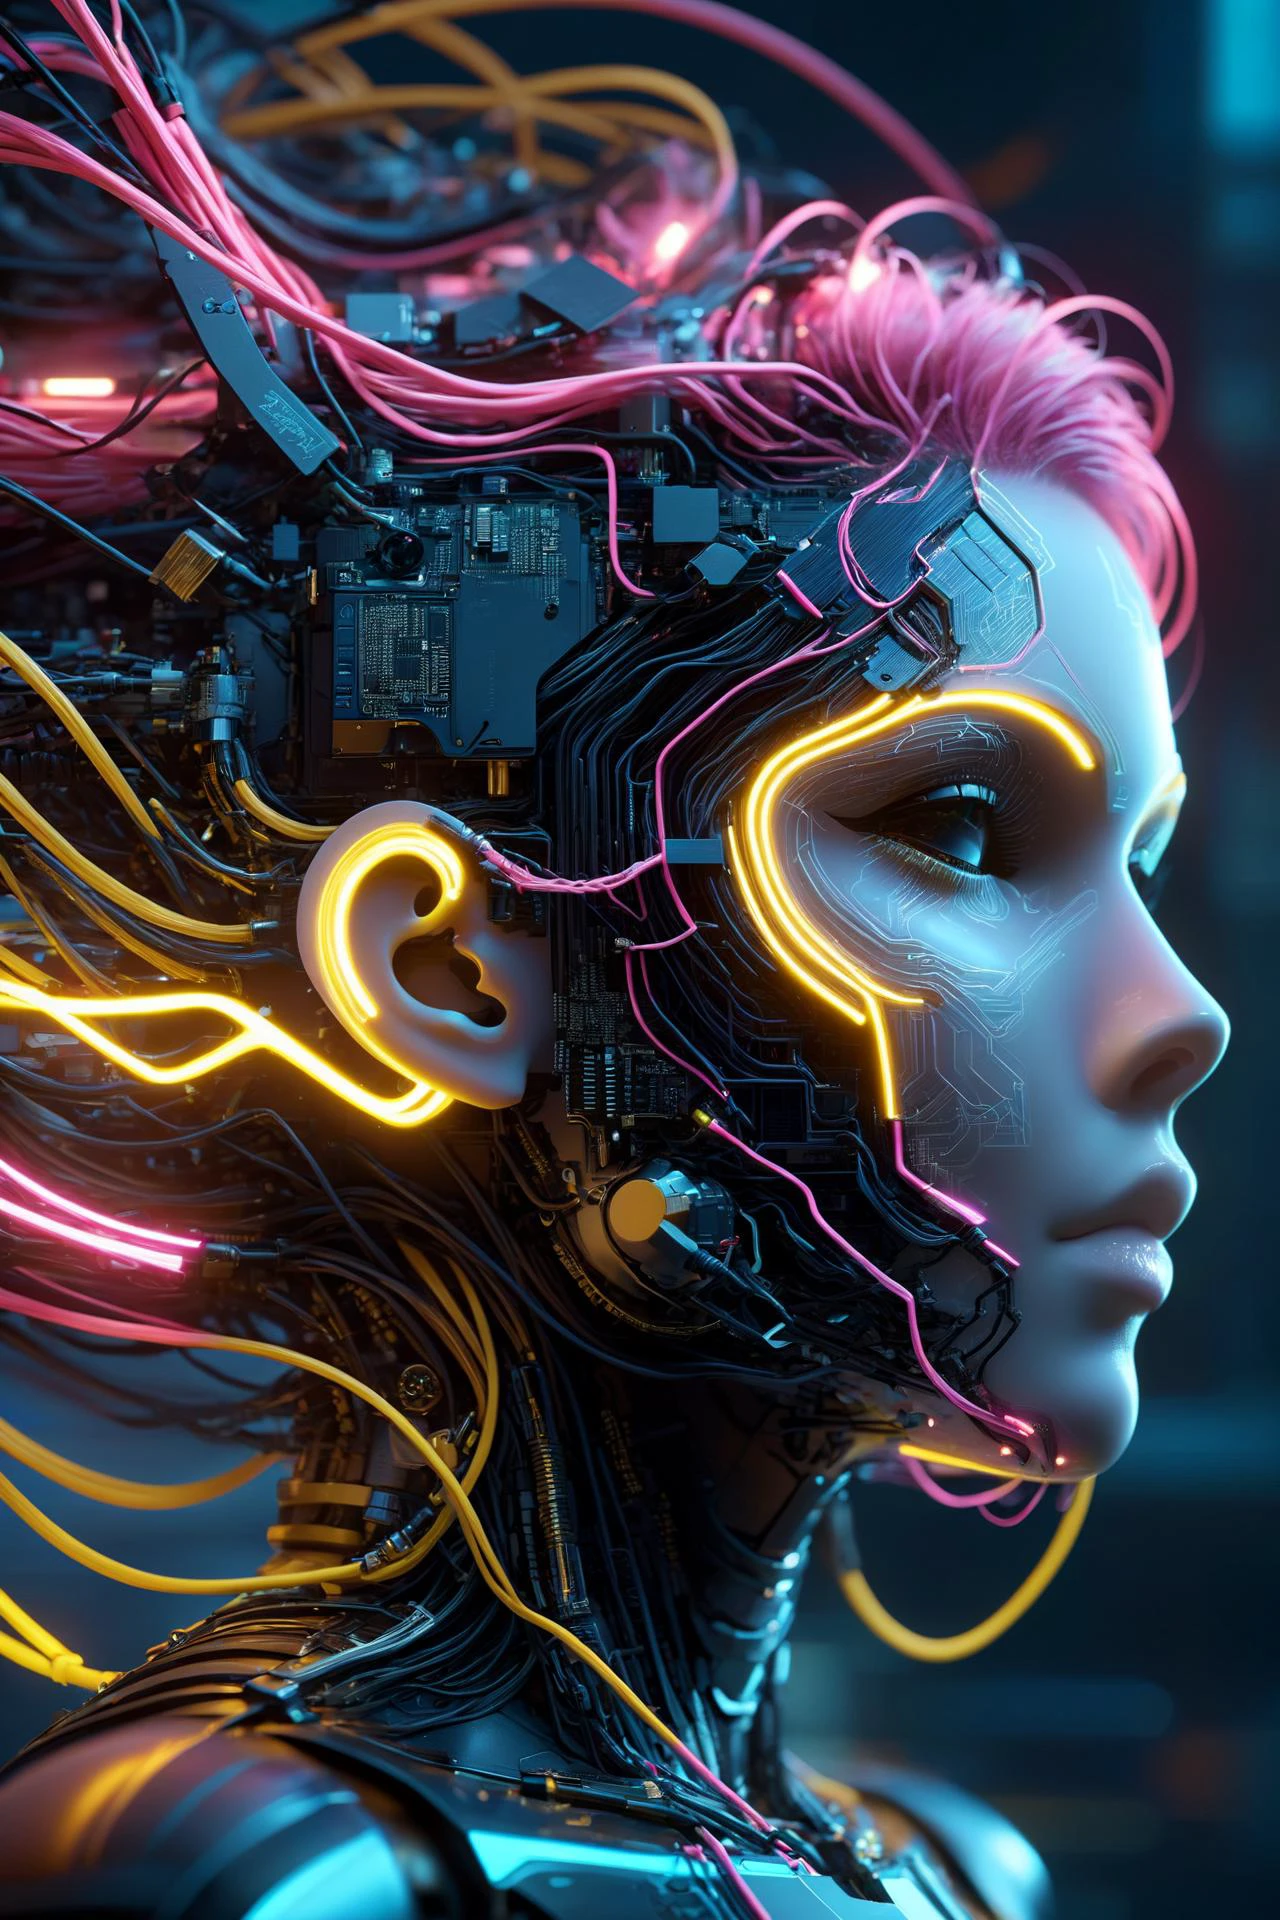 the head of a female cyborg, by Ralph McQuarrie, by Aaron Horkey, neon yellow lightning, neon teal lightning, neon magenta lightning, cables, wires, synthwave, vaporwave, retro futurism, circuitboard, dark futuristic, DonMW15pXL, floating, astral ziprealism, (masterpiece:1.2), best quality, (hyperdetailed, highest detailed:1.2), high resolution textures, 